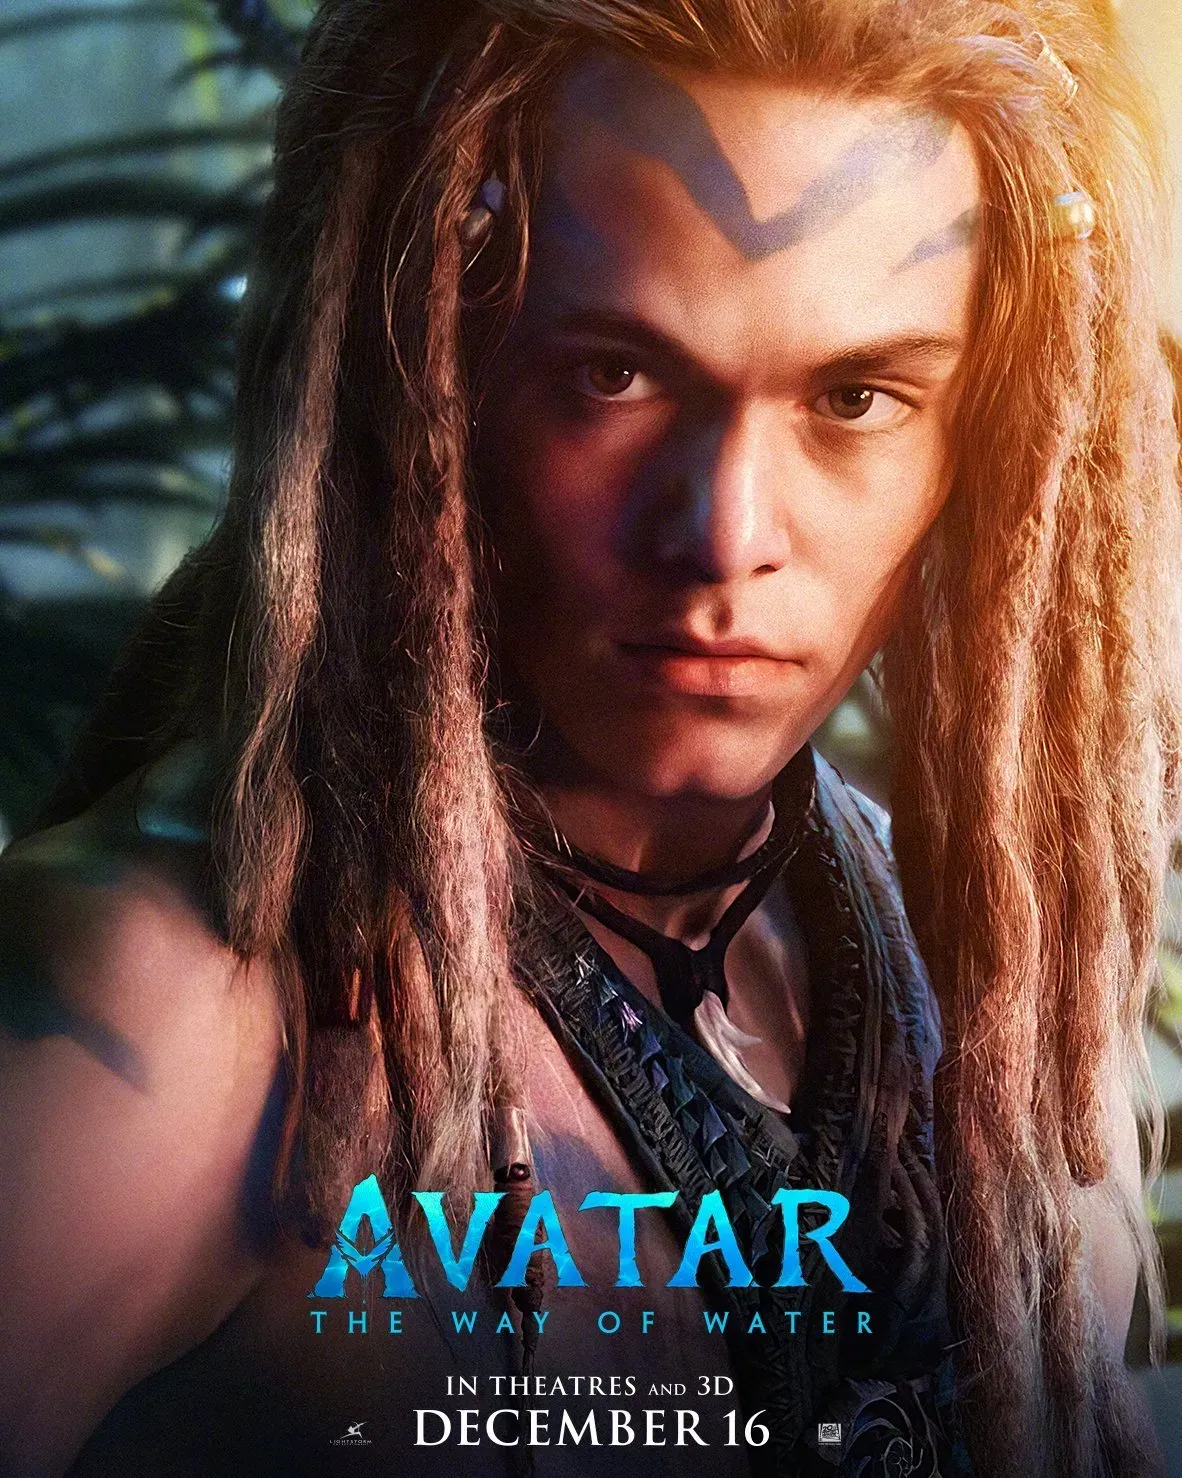 'Avatar: The Way of Water' Releases Character Posters and Announces Pre-Orders Have Started | FMV6